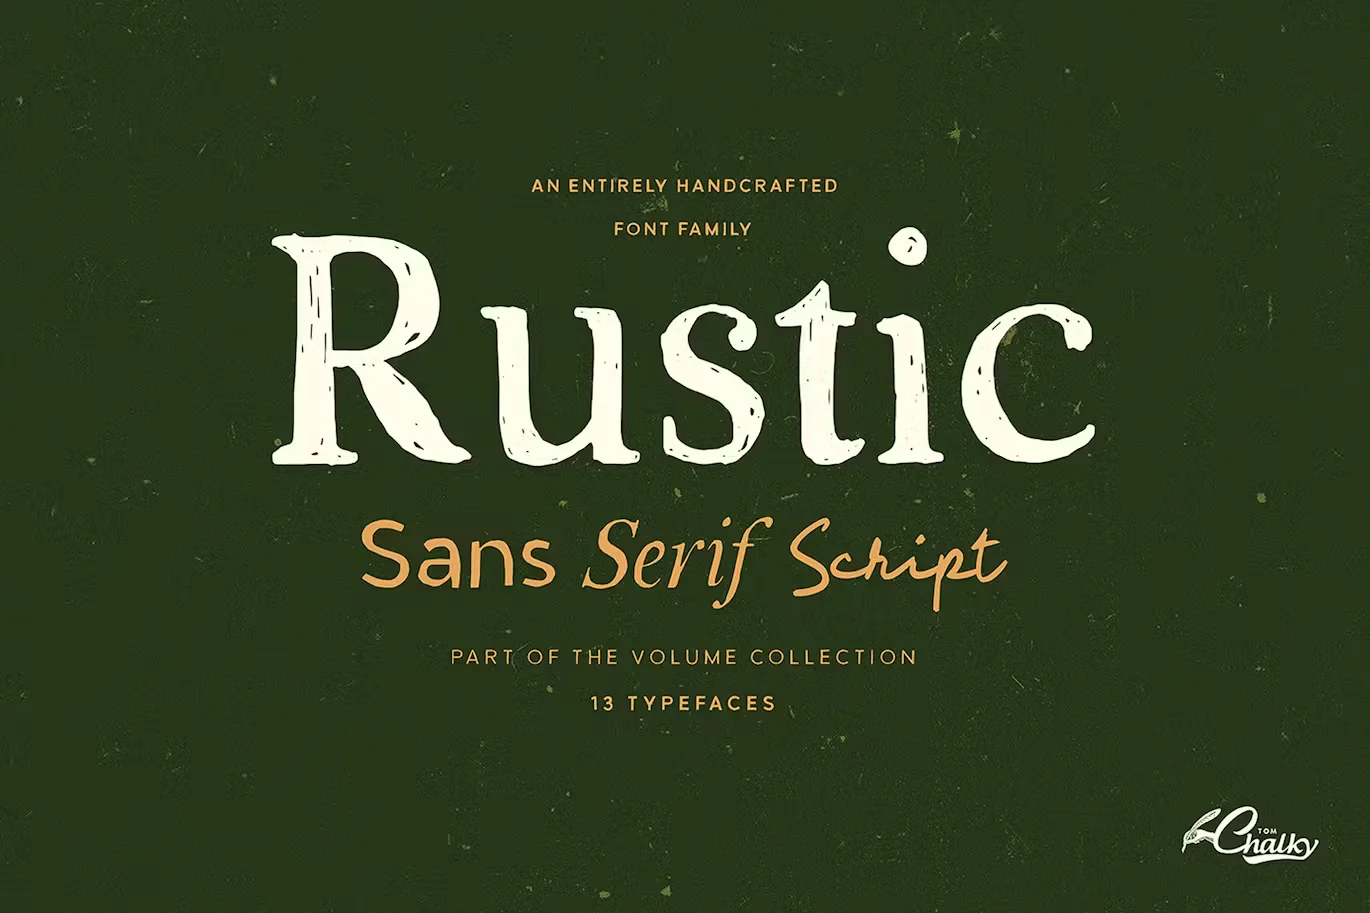 Rustic – Handcrafted Font Family